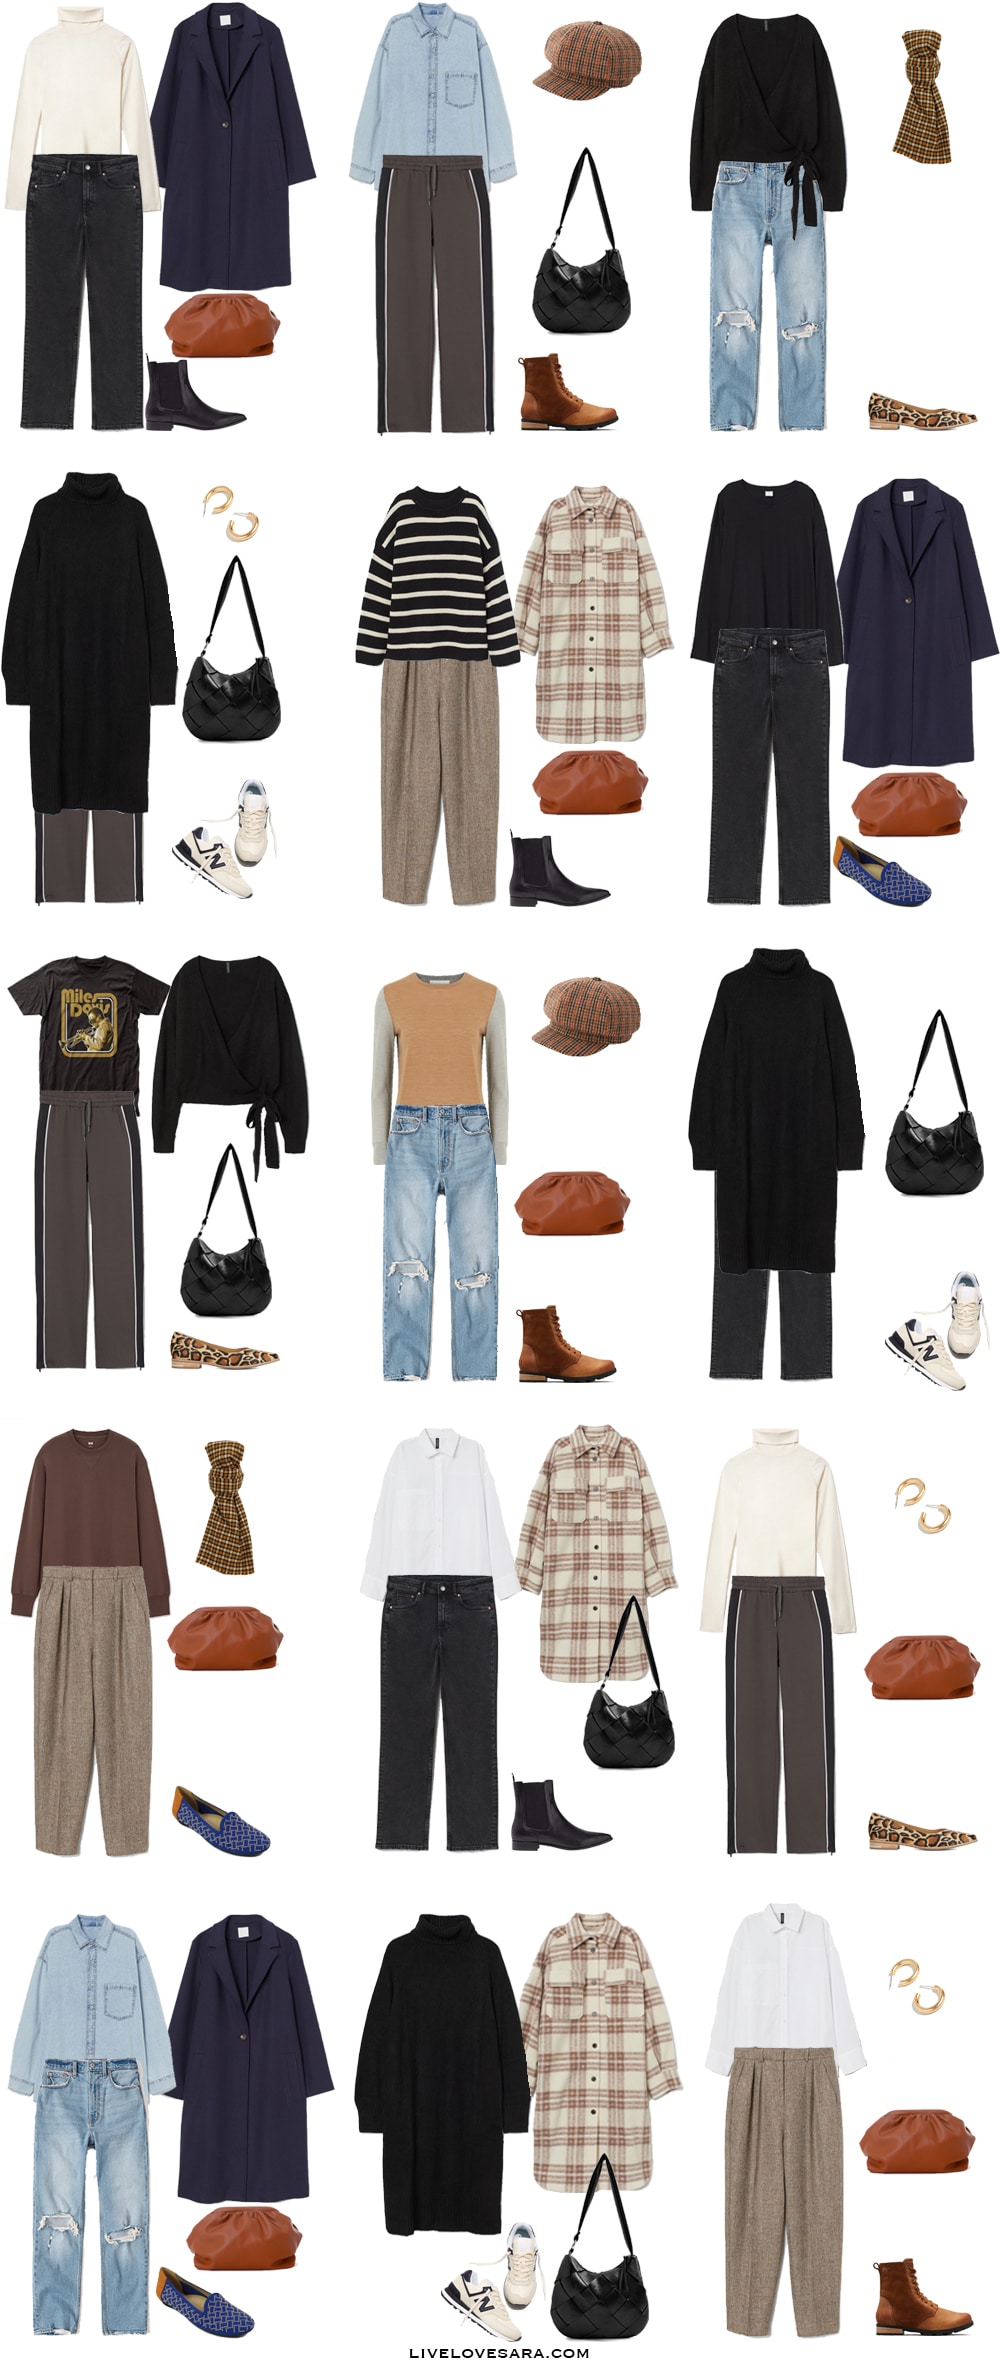 A Fall Capsule Wardrobe on a Budget Outfits 16-30